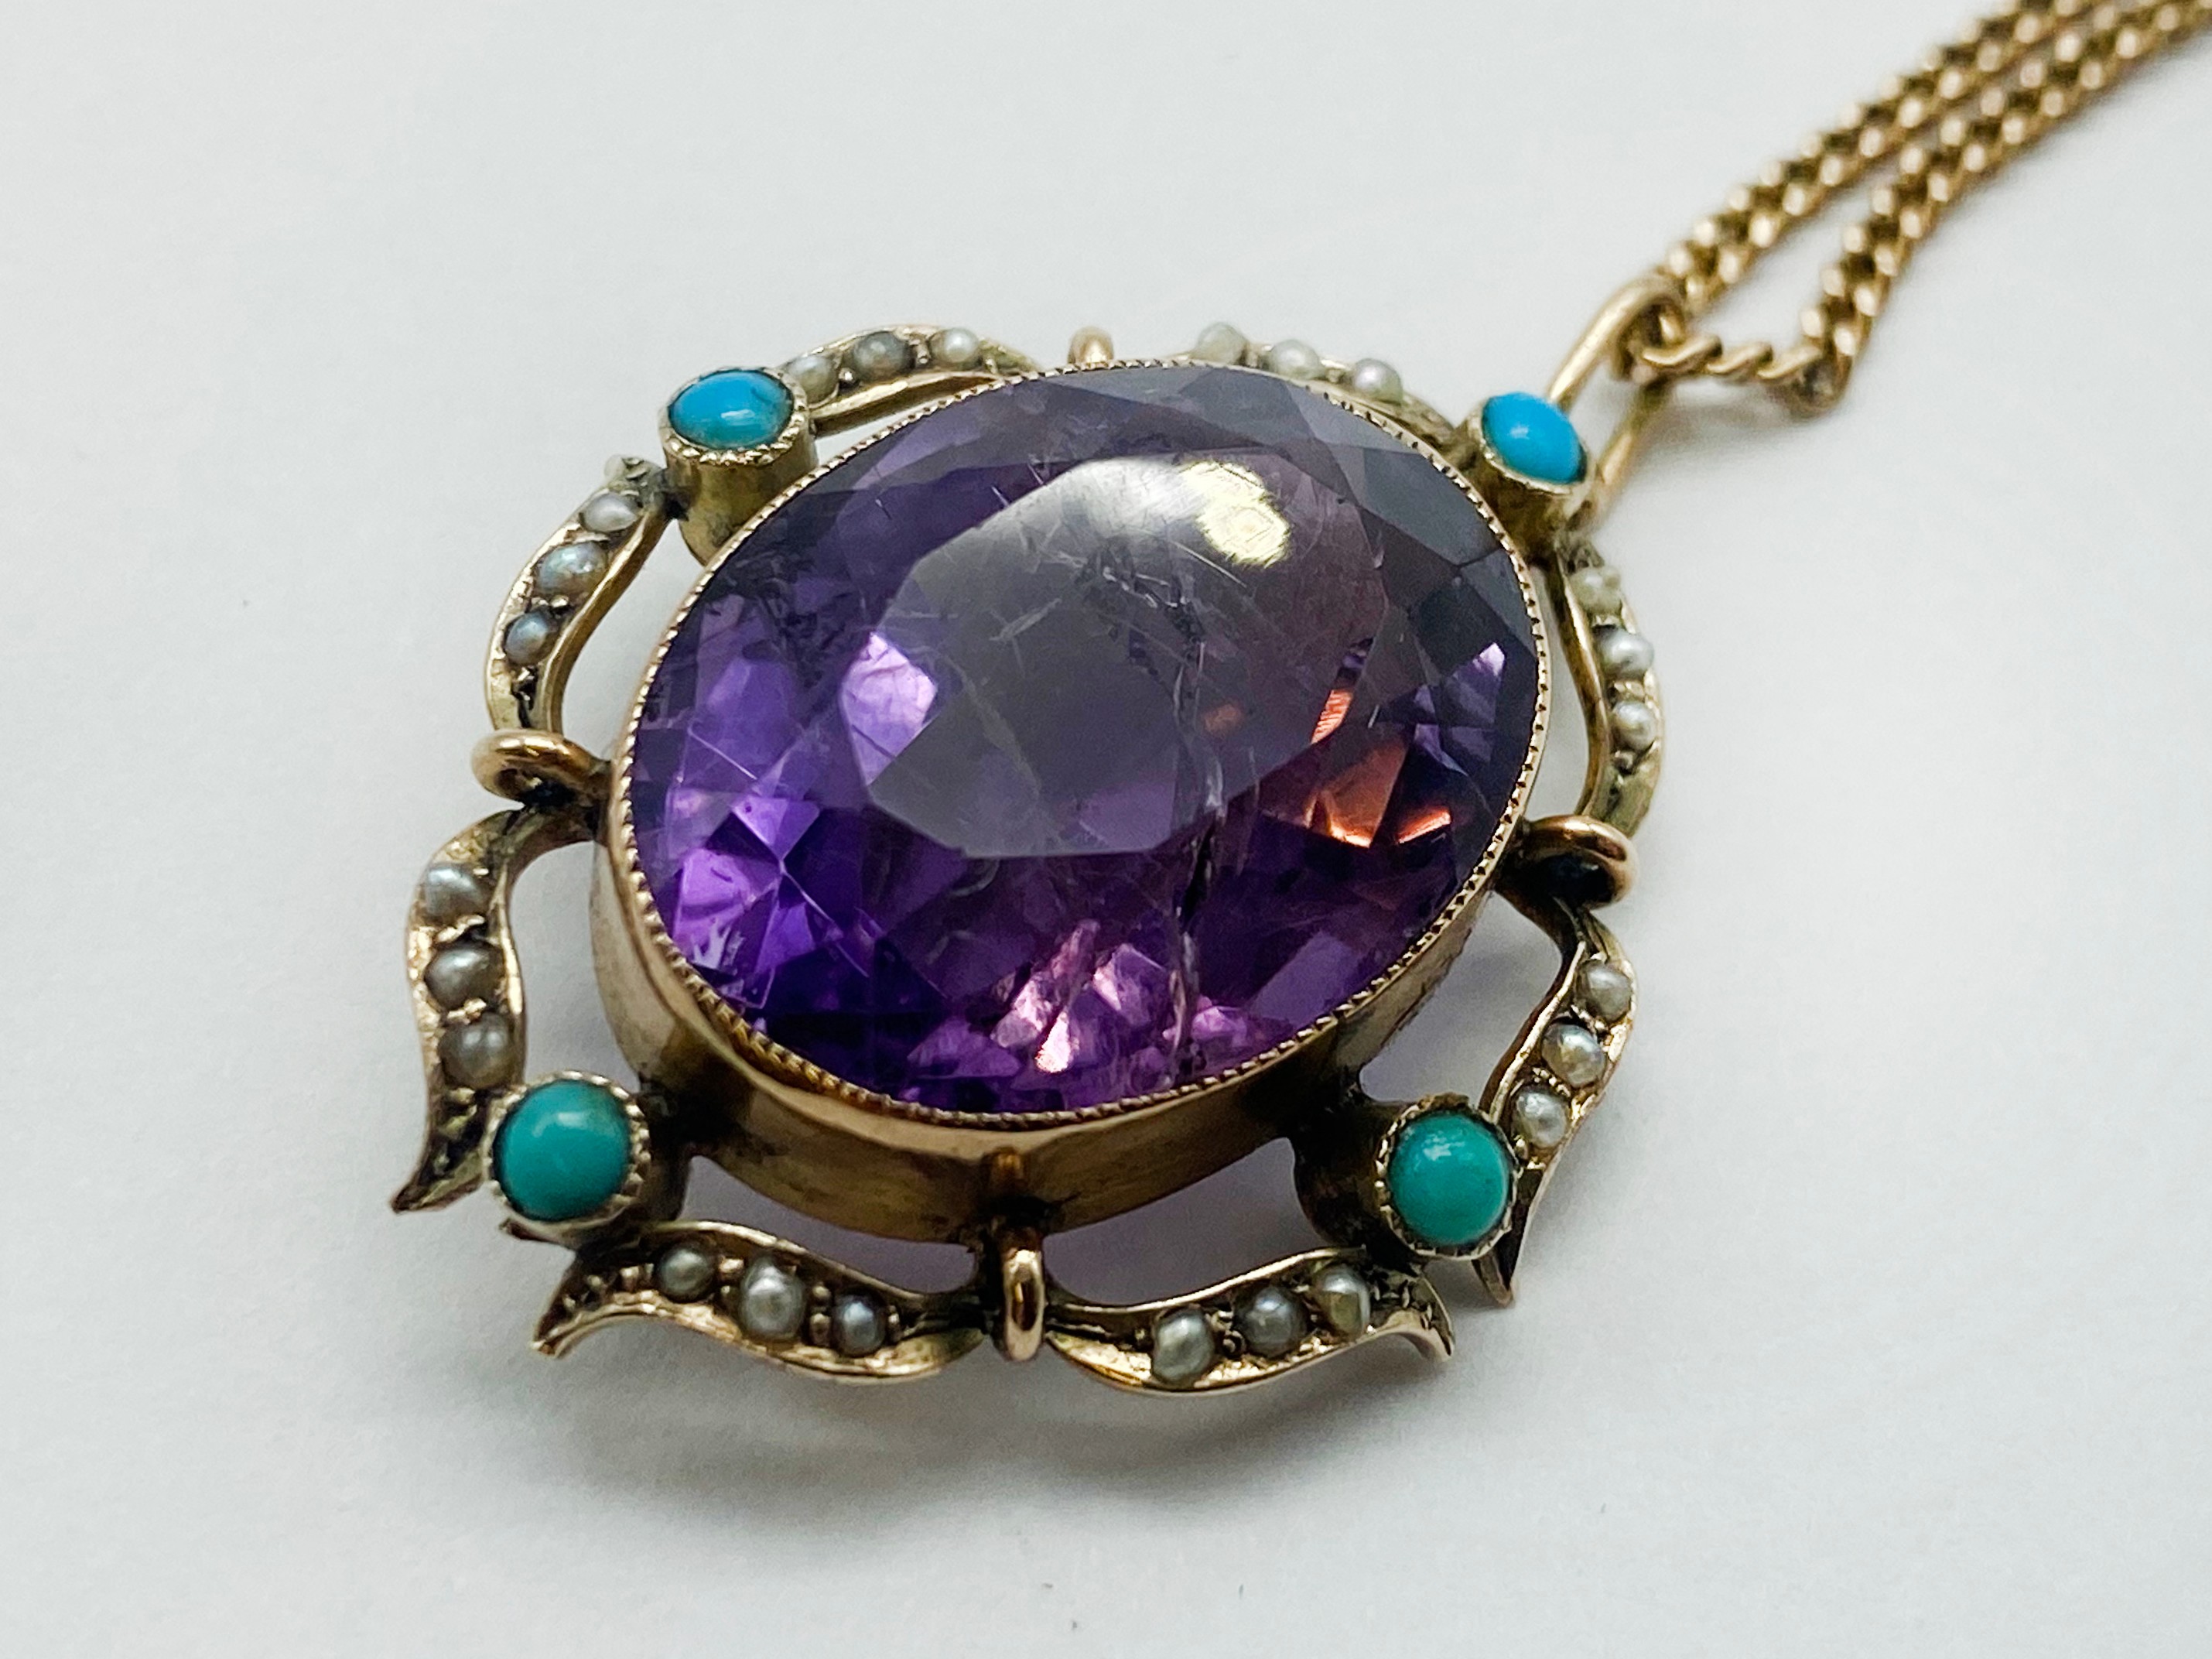 9CT GOLD AMETHYST, TURQUOISE & SEED PEAL PENDANT AND CHAIN - Image 2 of 4